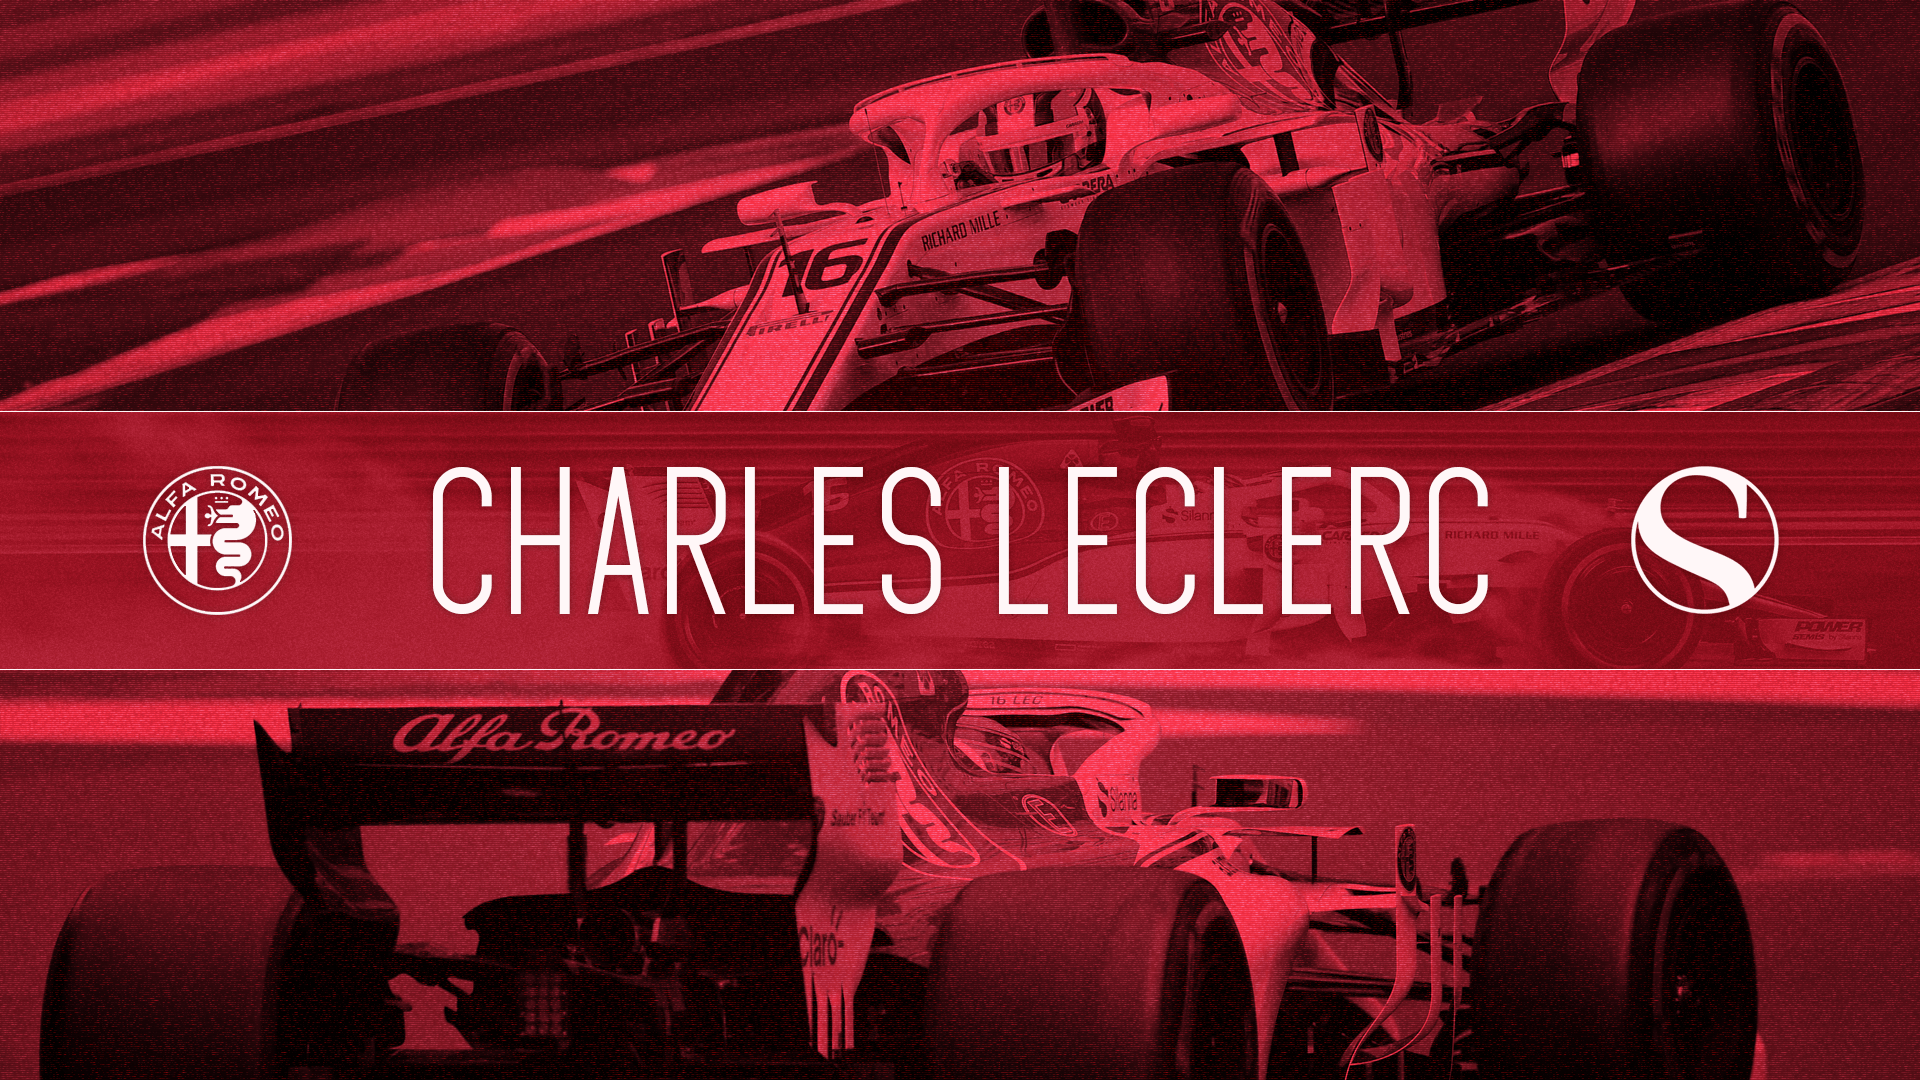 Charles Leclerc desktop wallpaper I made out of boredom. Hopefully not too late for the hypetrain